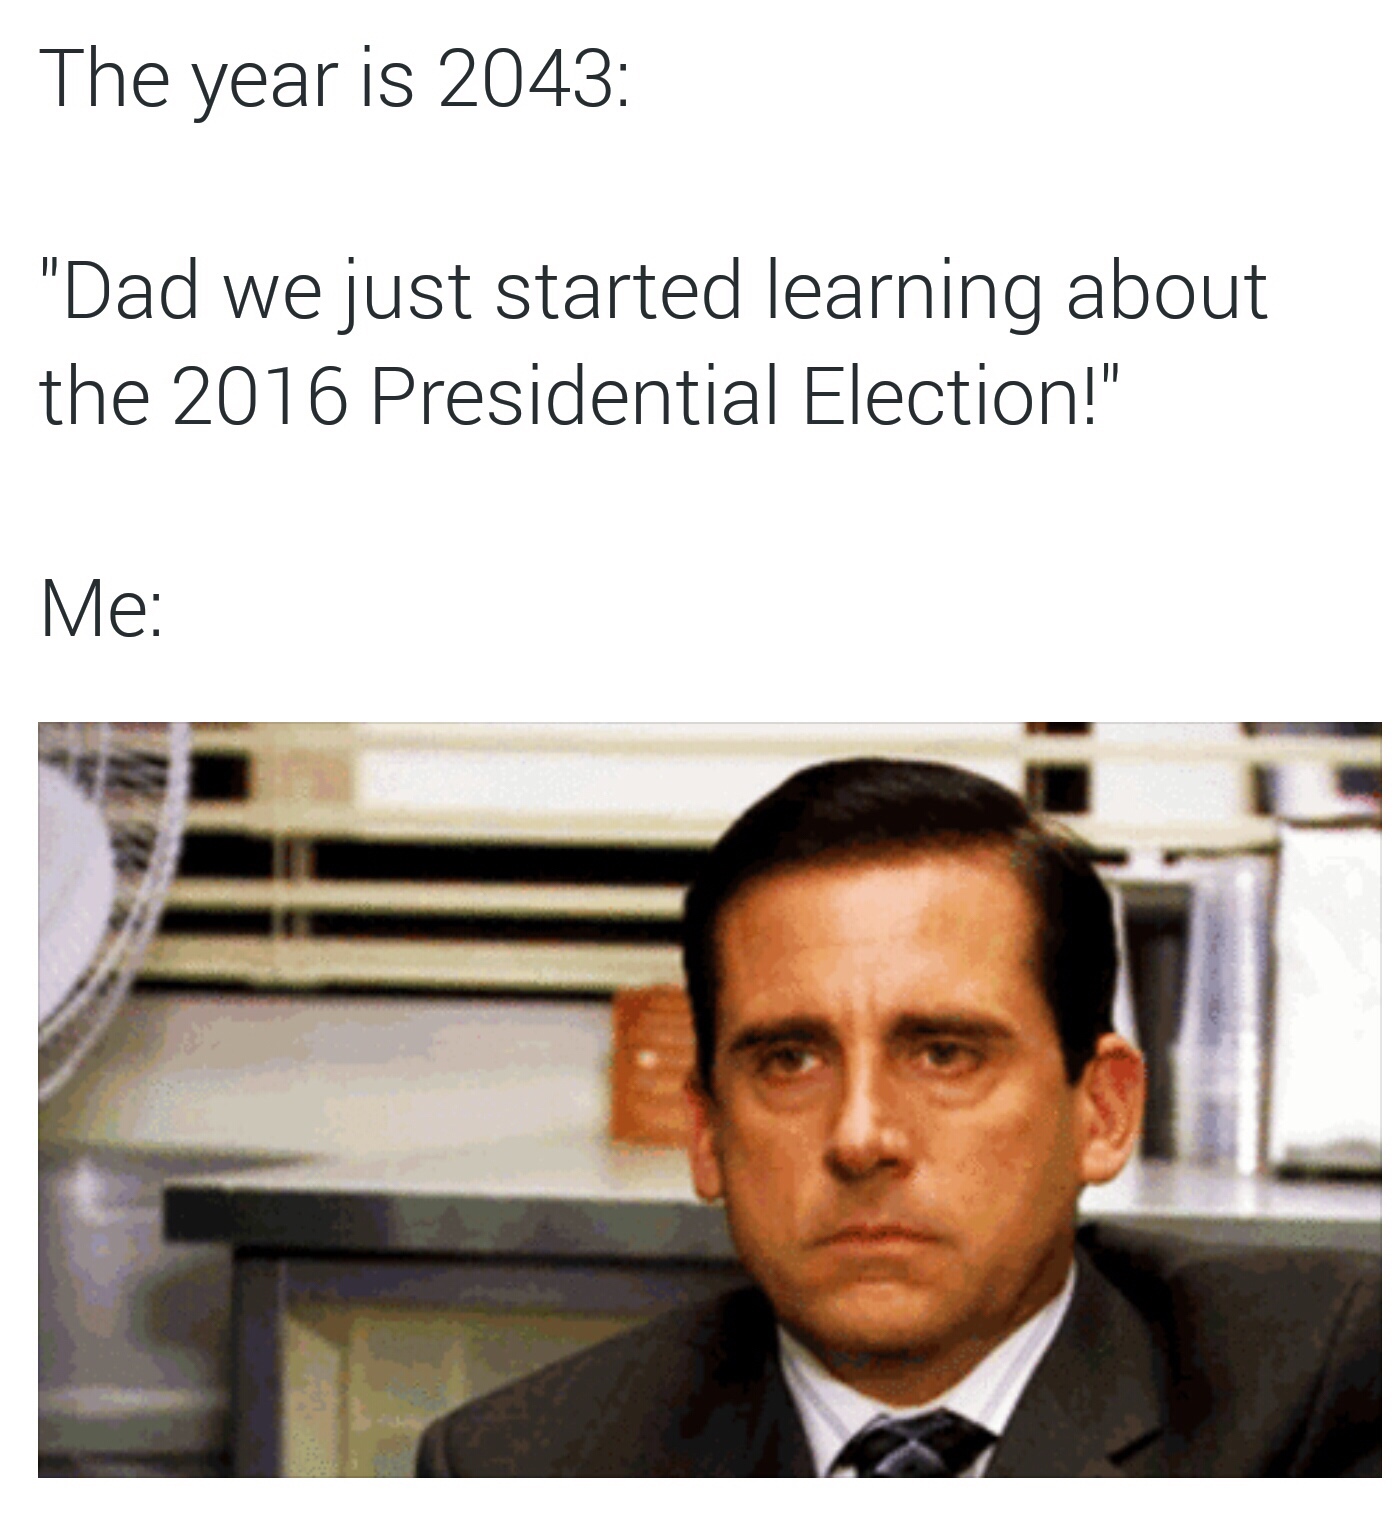 michael scott lol meme - The year is 2043 "Dad we just started learning about the 2016 Presidential Election!" Me